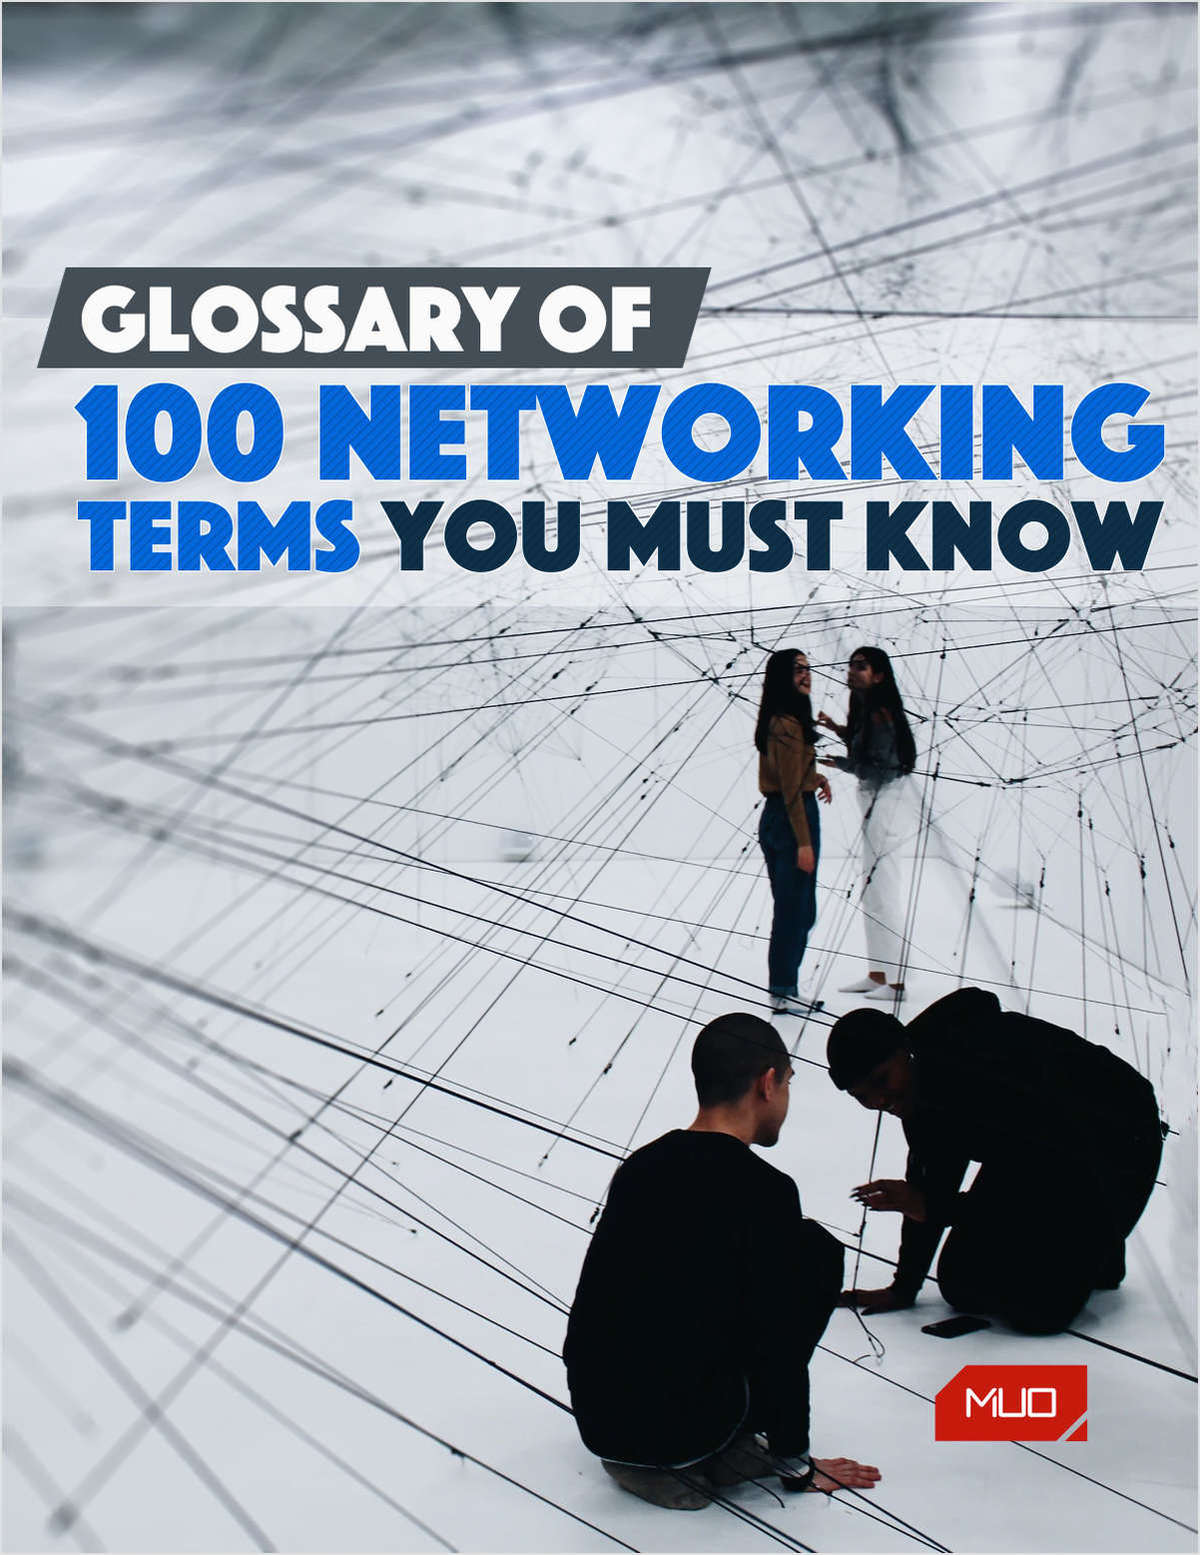 Glossary of 100 Networking Terms You Must Know